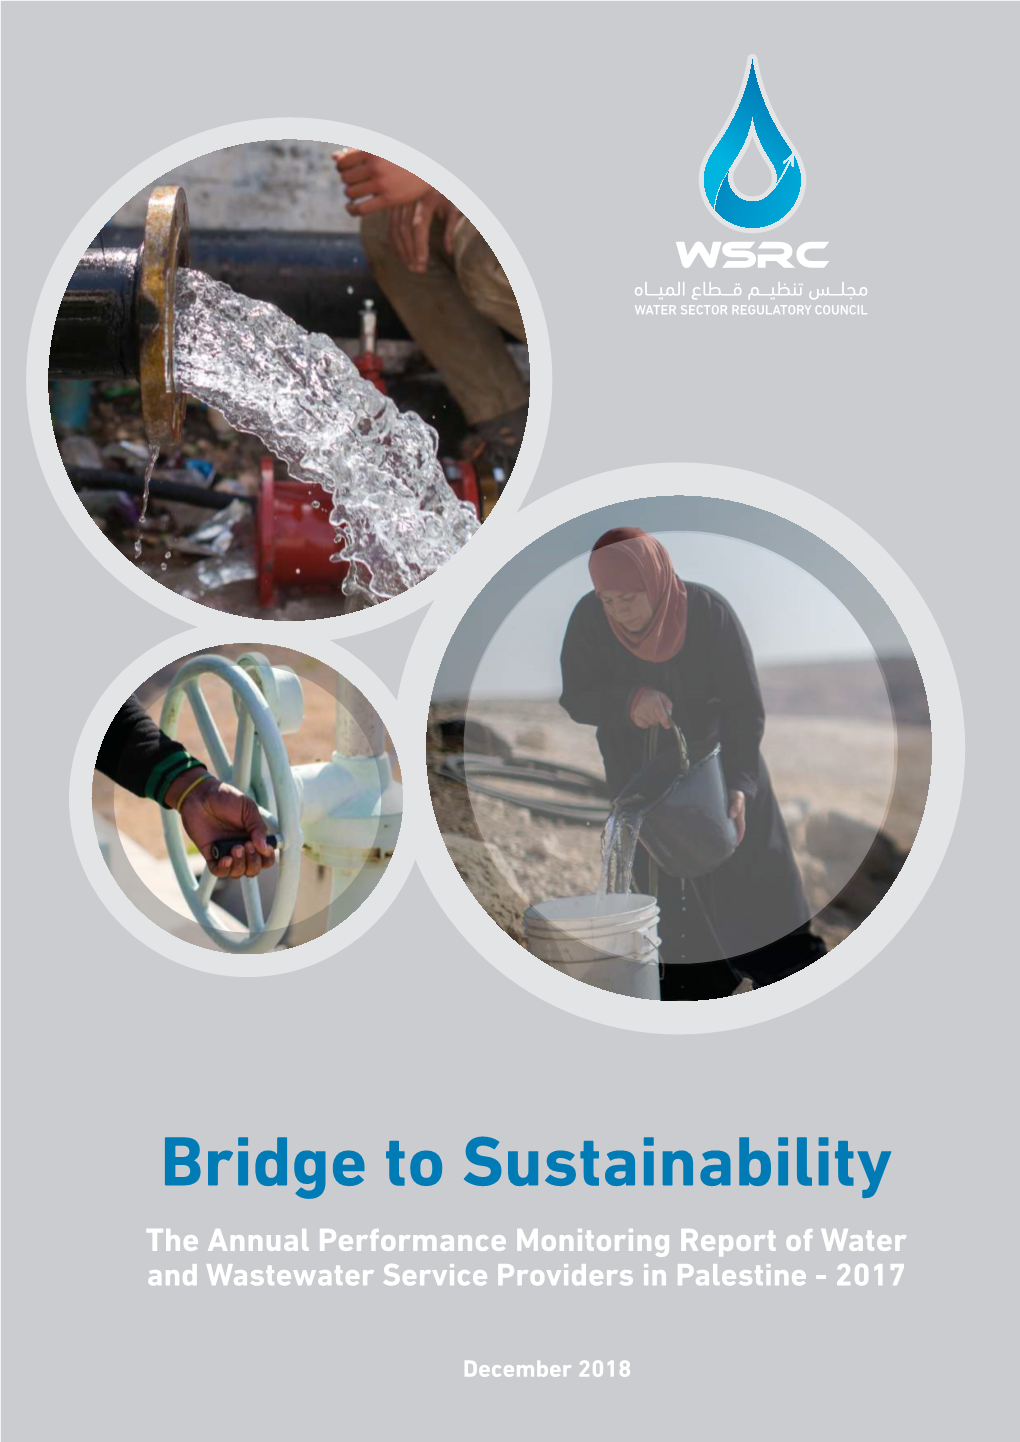 Bridge to Sustainability the Annual Performance Monitoring Report of Water and Wastewater Service Providers in Palestine - 2017